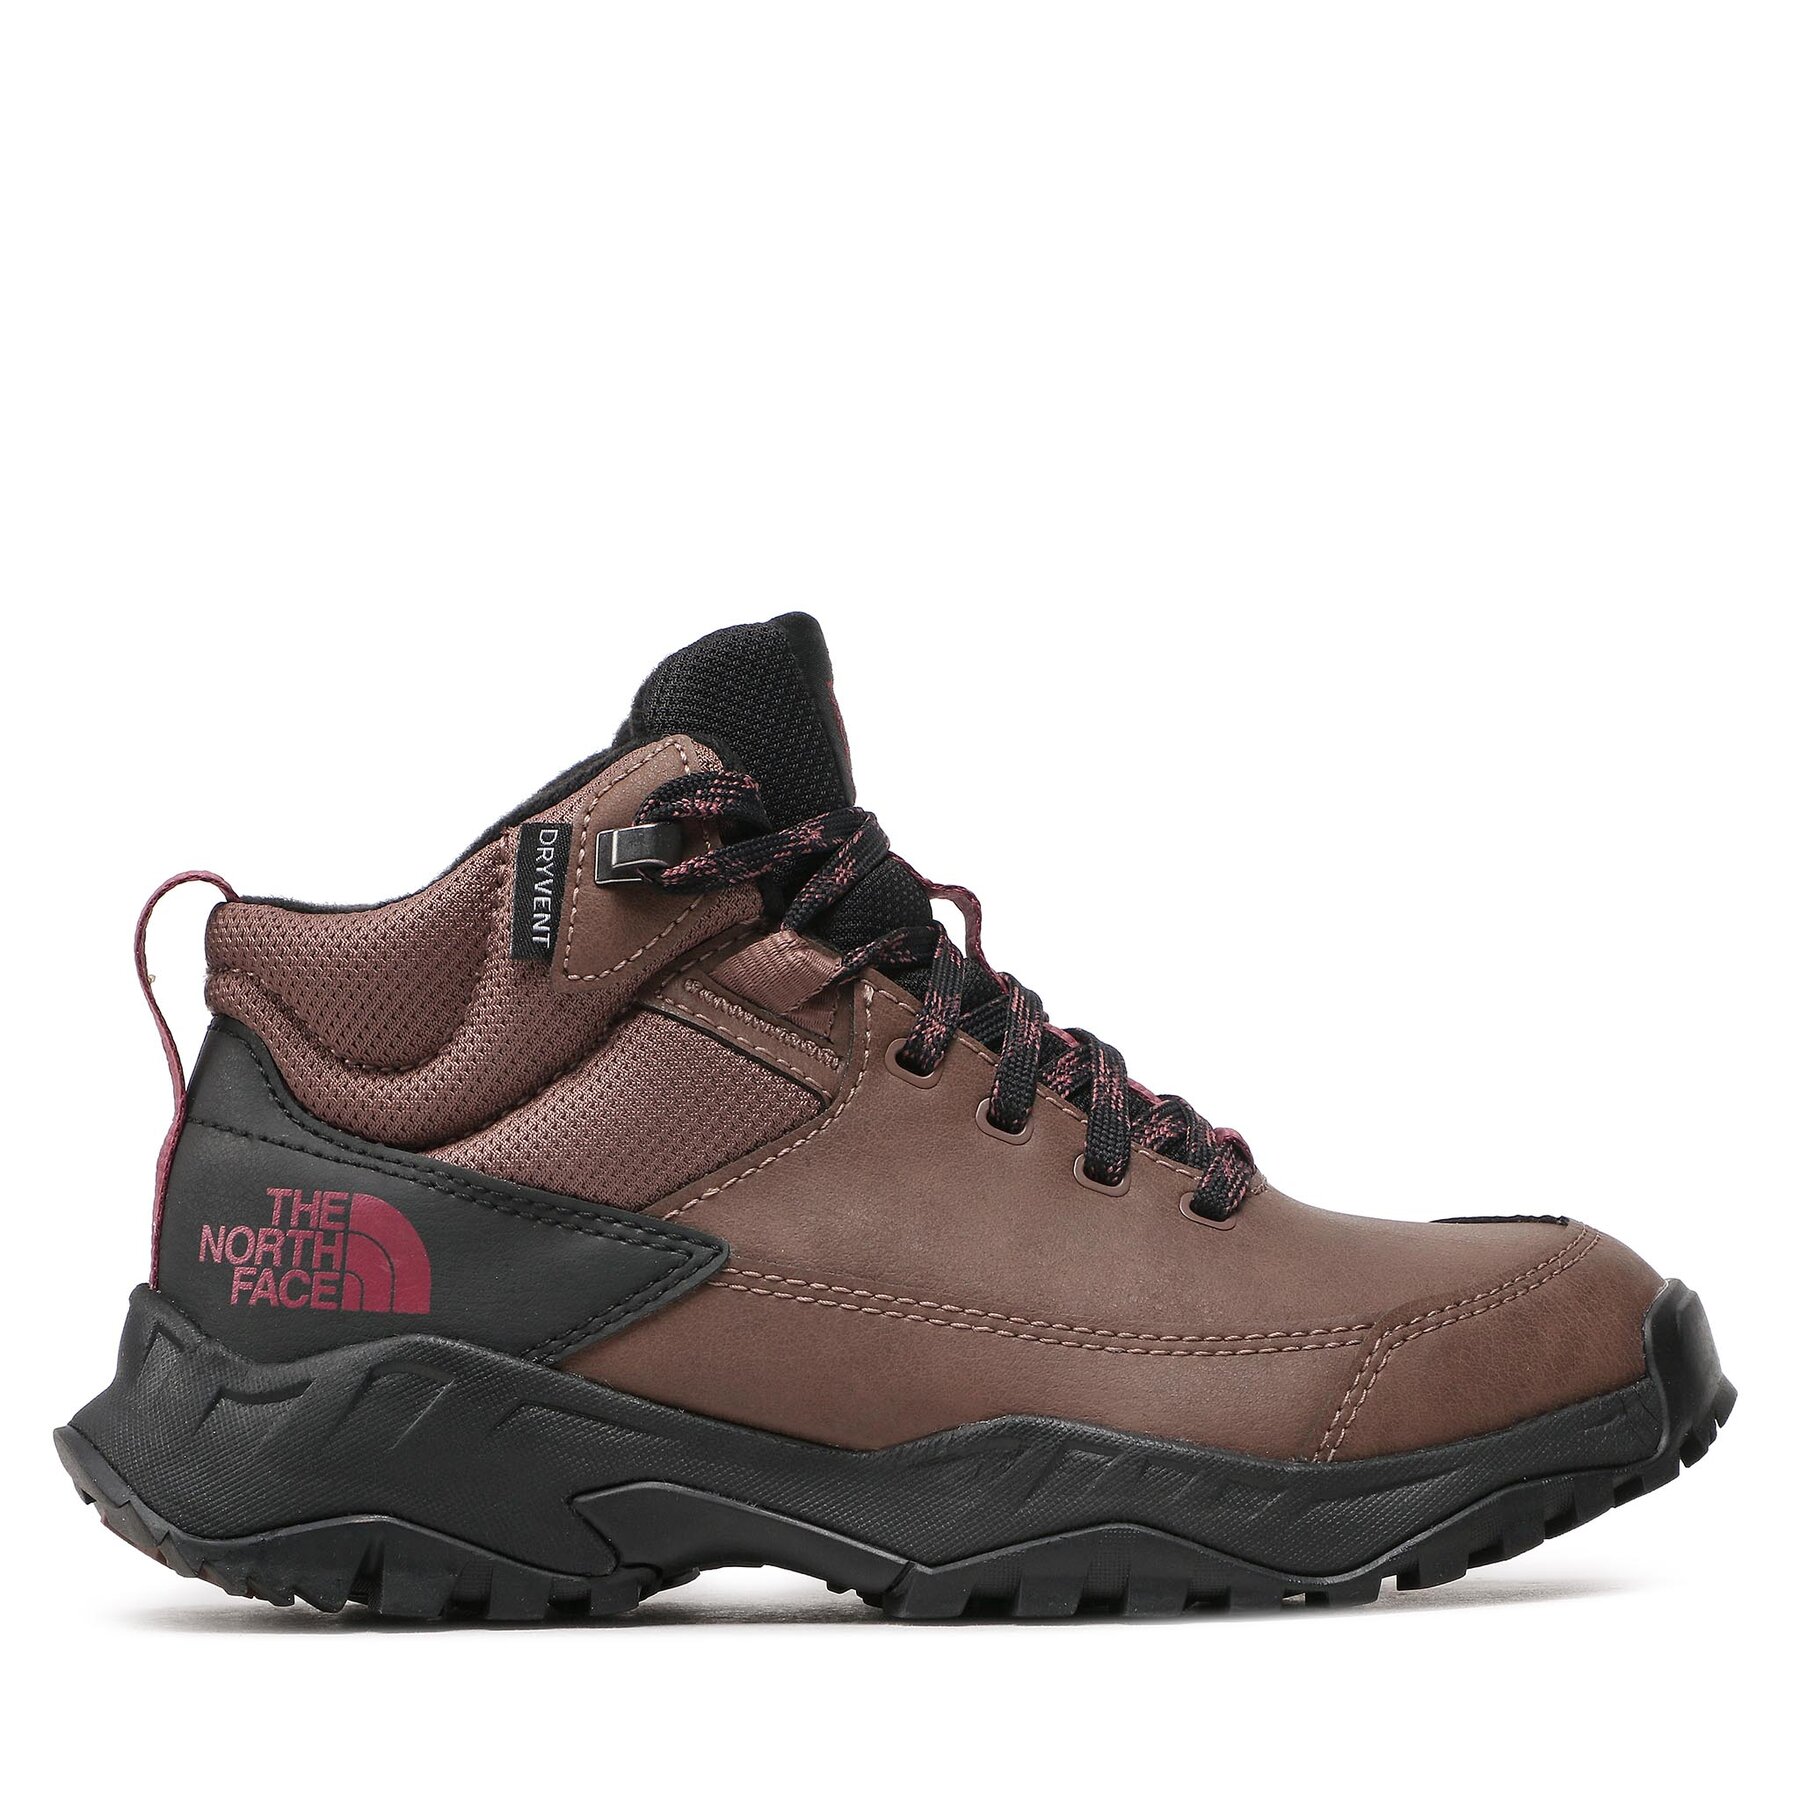 Trekkingschuhe The North Face Storm Strike III Wp NF0A5LWG7T41 Deep Taupe/Tnf Black von The North Face